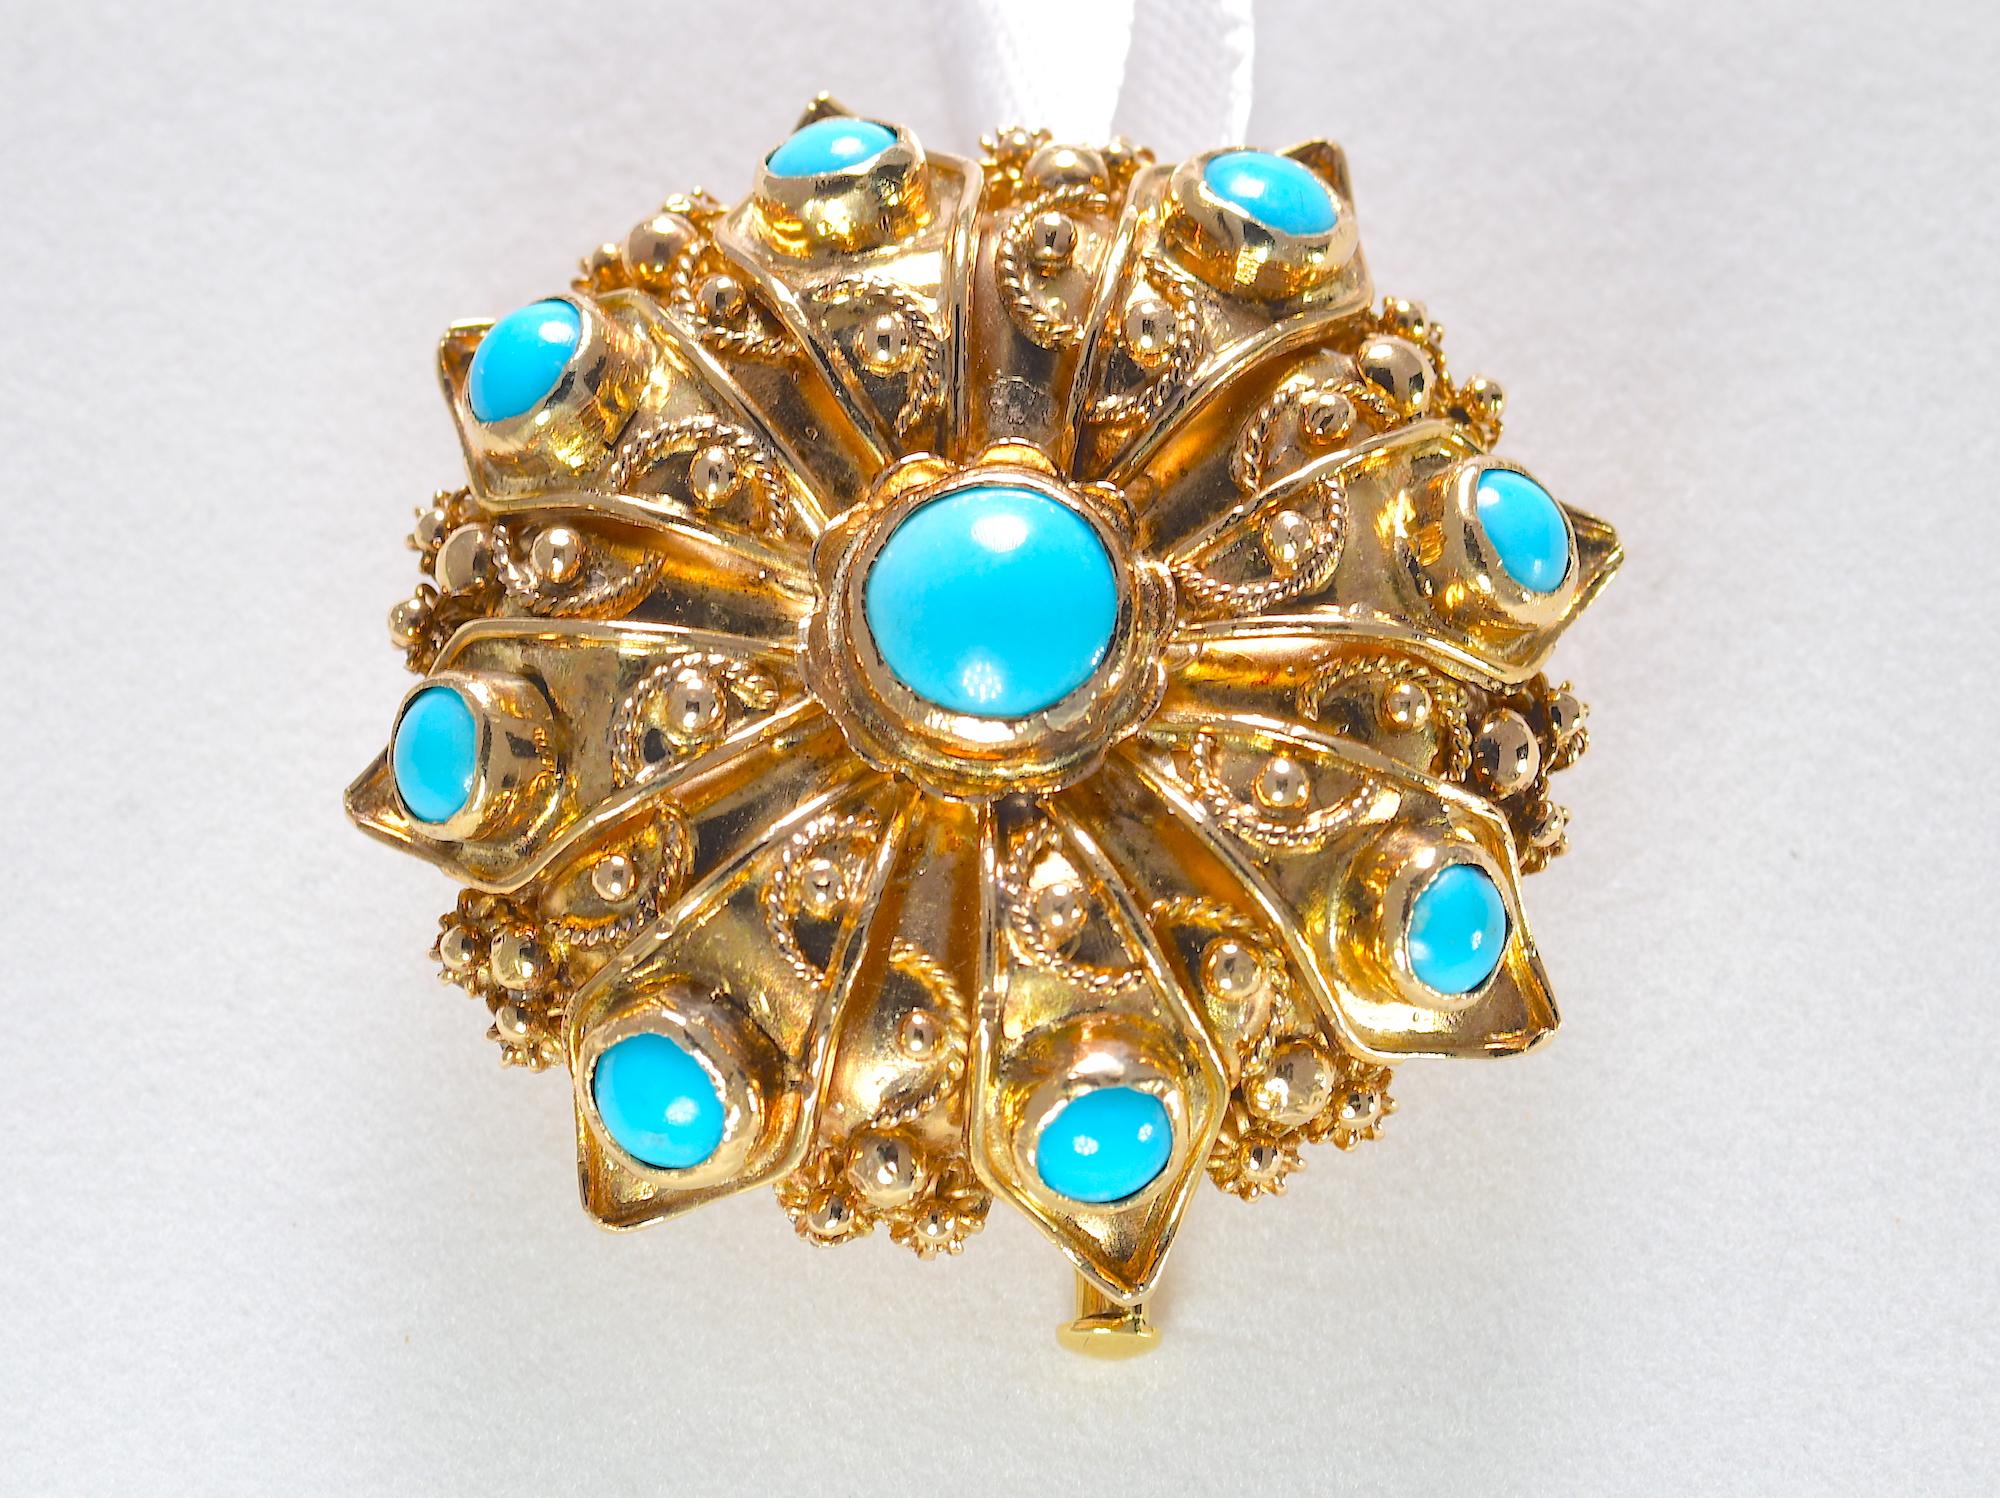 Round Cabochon Turquoise Pin / Pendant 18K Yellow Gold 16.30 grams

Stone: Turquoise   
Shape: Cabochon
Metal: Yellow Gold
Purity: 18K
Style: Pin / Pendant
Total Gram Weight: 16.30 grams

#160187-1
